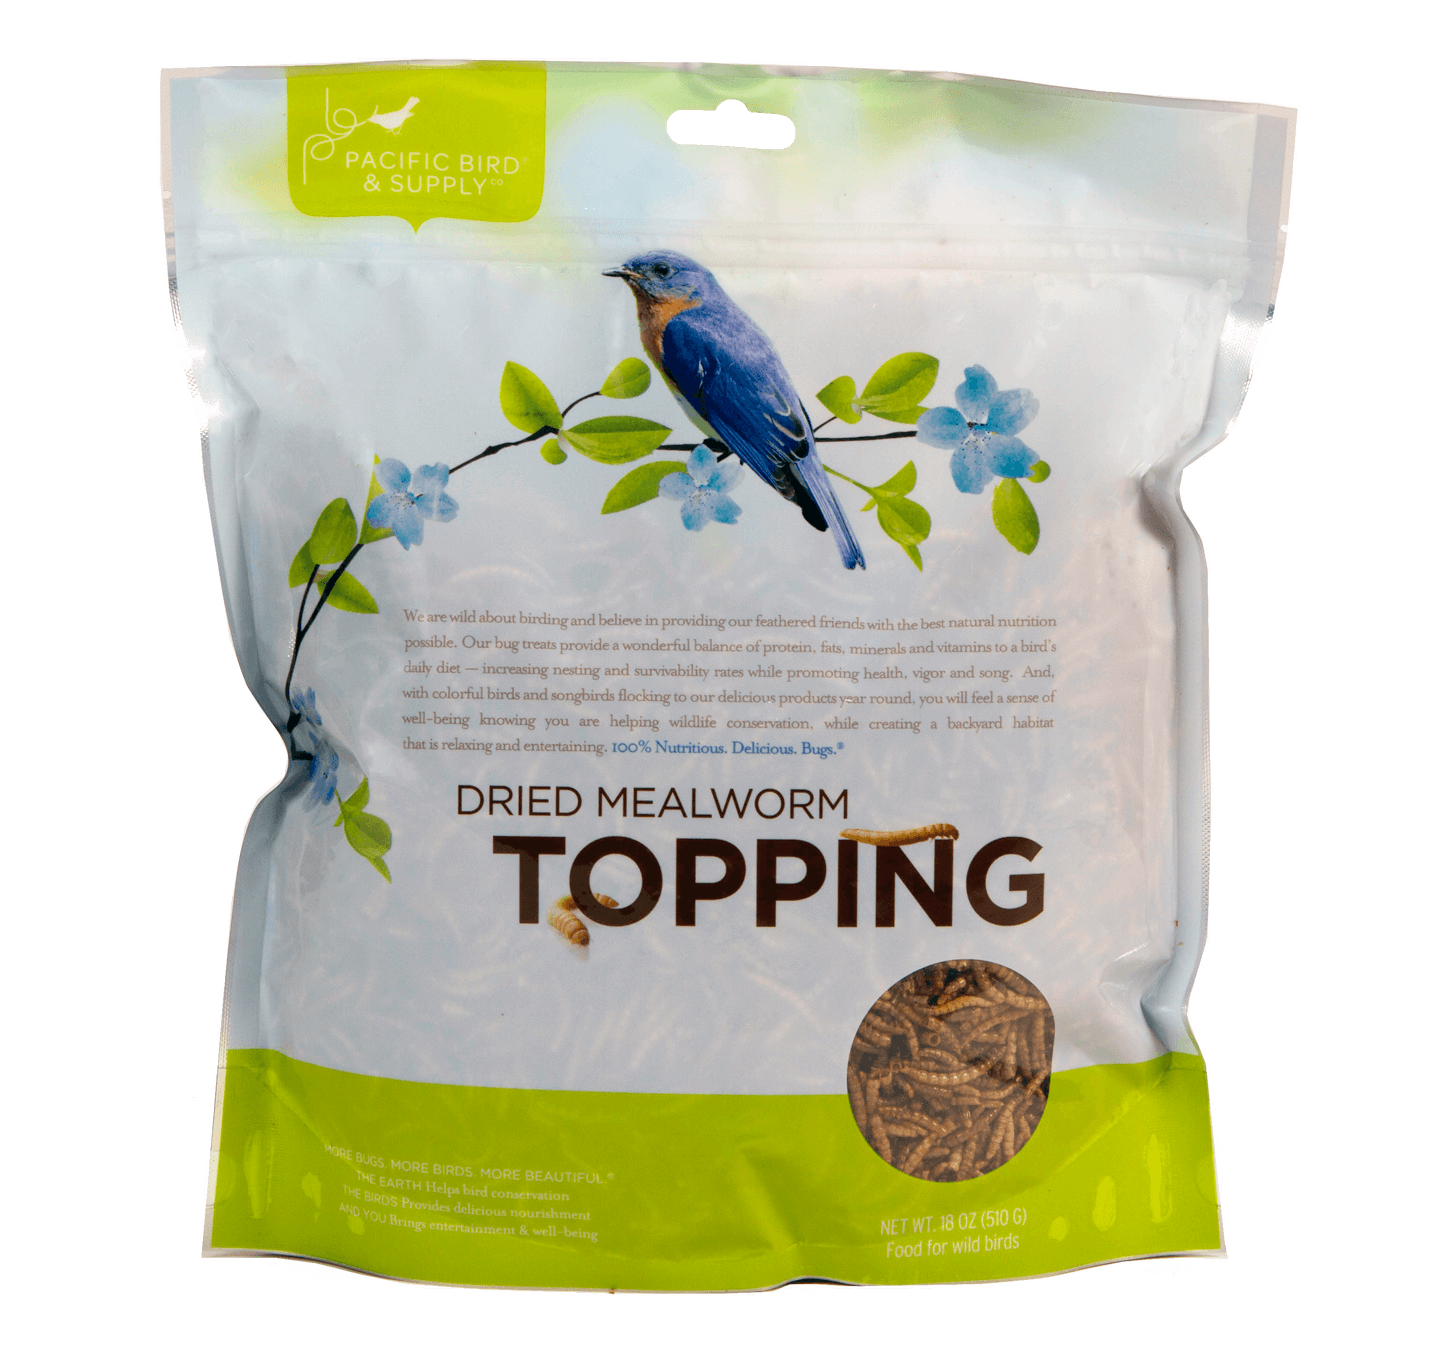 Dried Mealworm Topping (18.00oz)